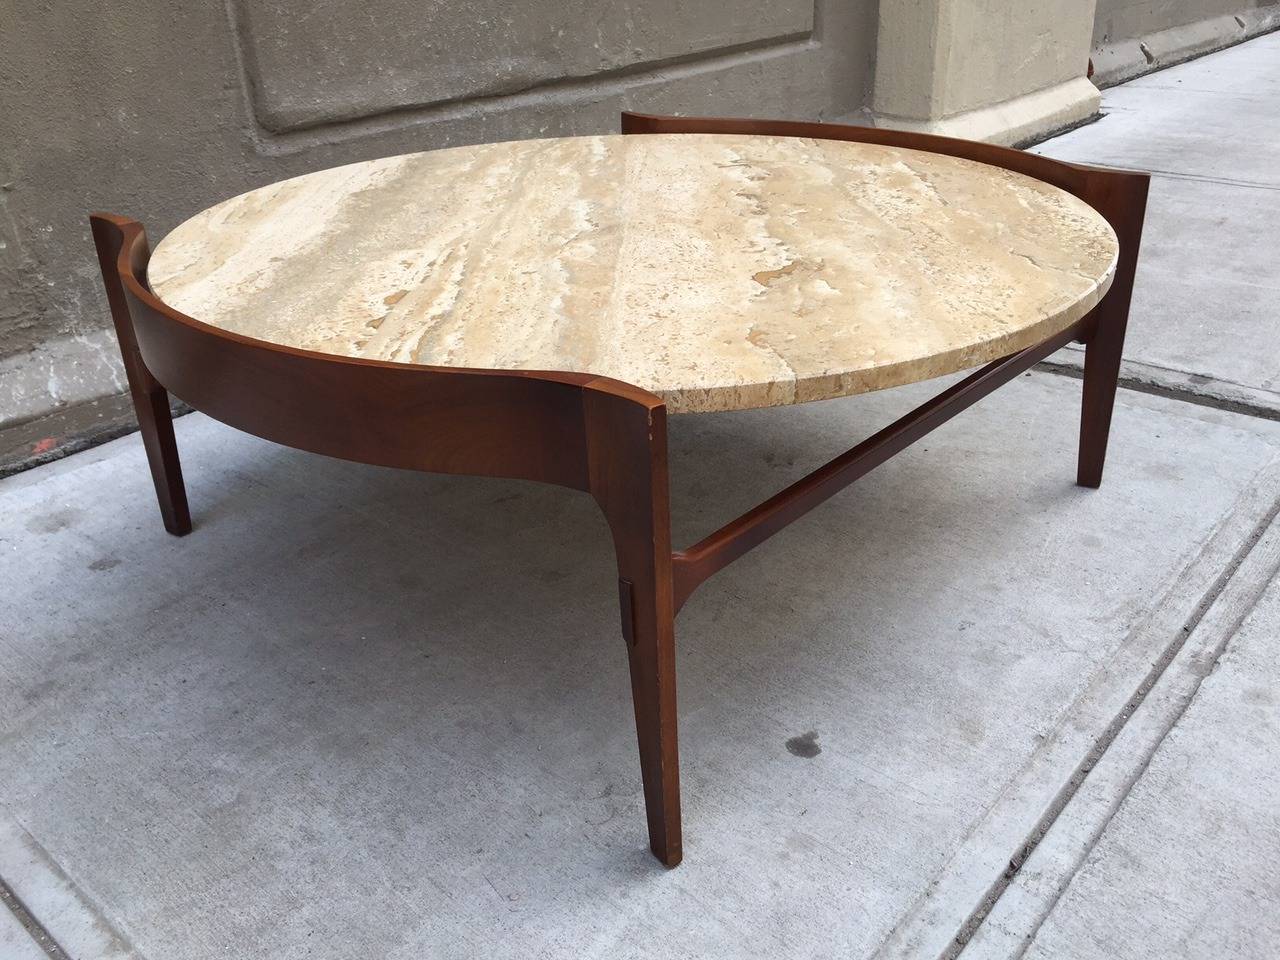 Coffee table with travertine top and a sculpted walnut frame, by Gordon Furniture Co.   Bertha Schaefer style. 